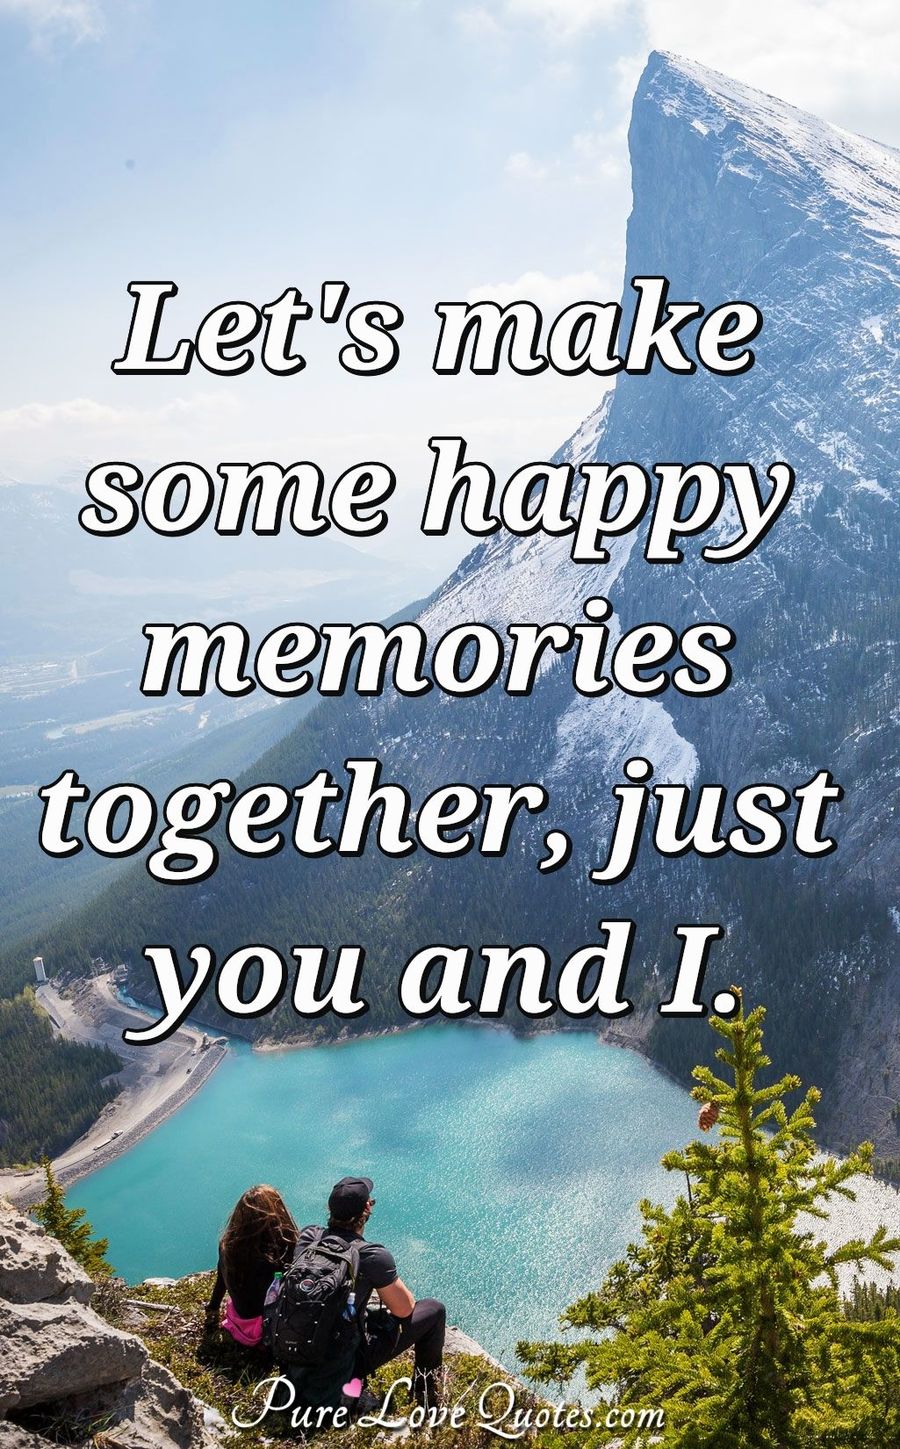 tf lets make some happy memories together just